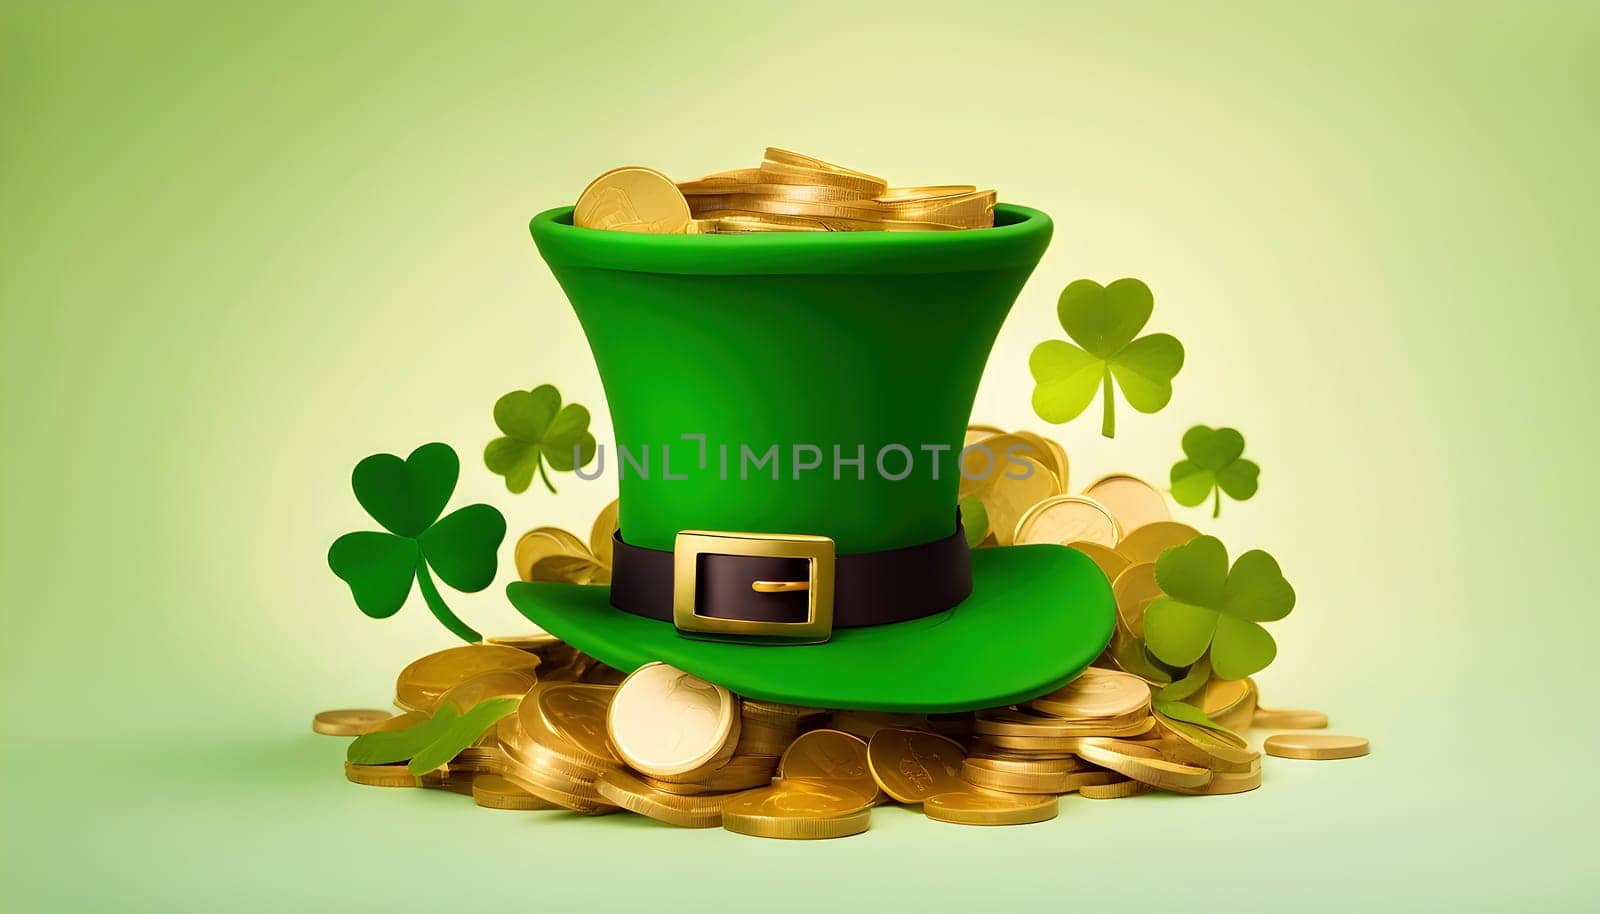 Leprechaun Hat with Gold Coins and Shamrocks by rostik924